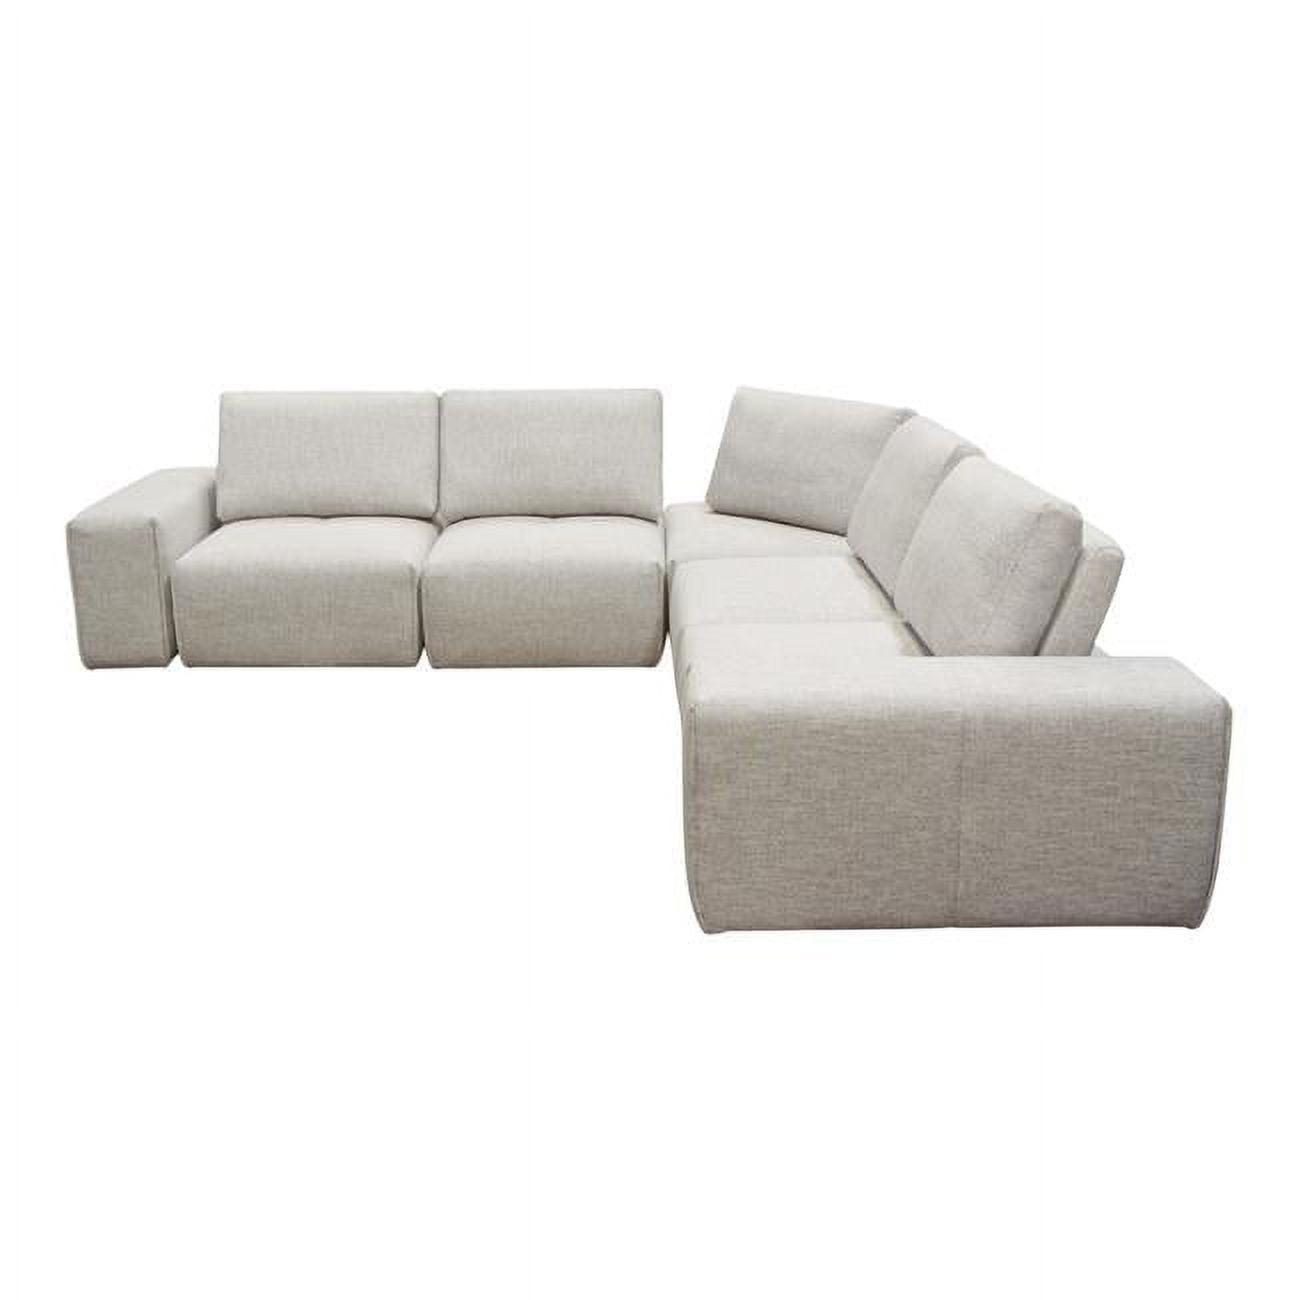 The Best Sofas and Sectionals with Adjustable Backrests